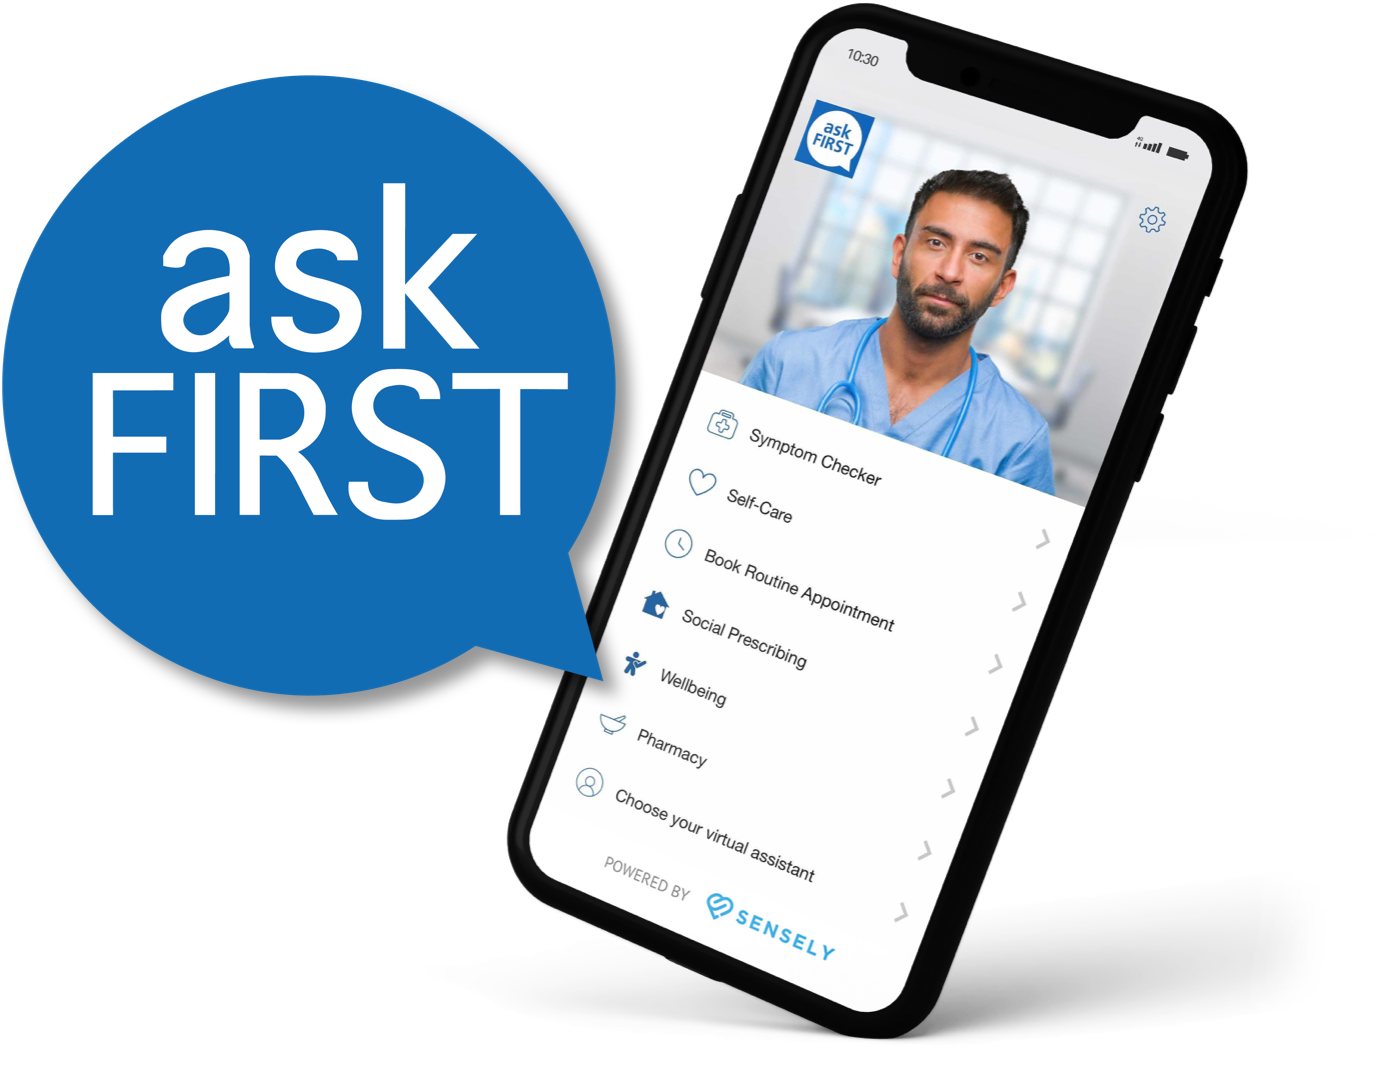 A Smartphone with the AskFirst app on screen